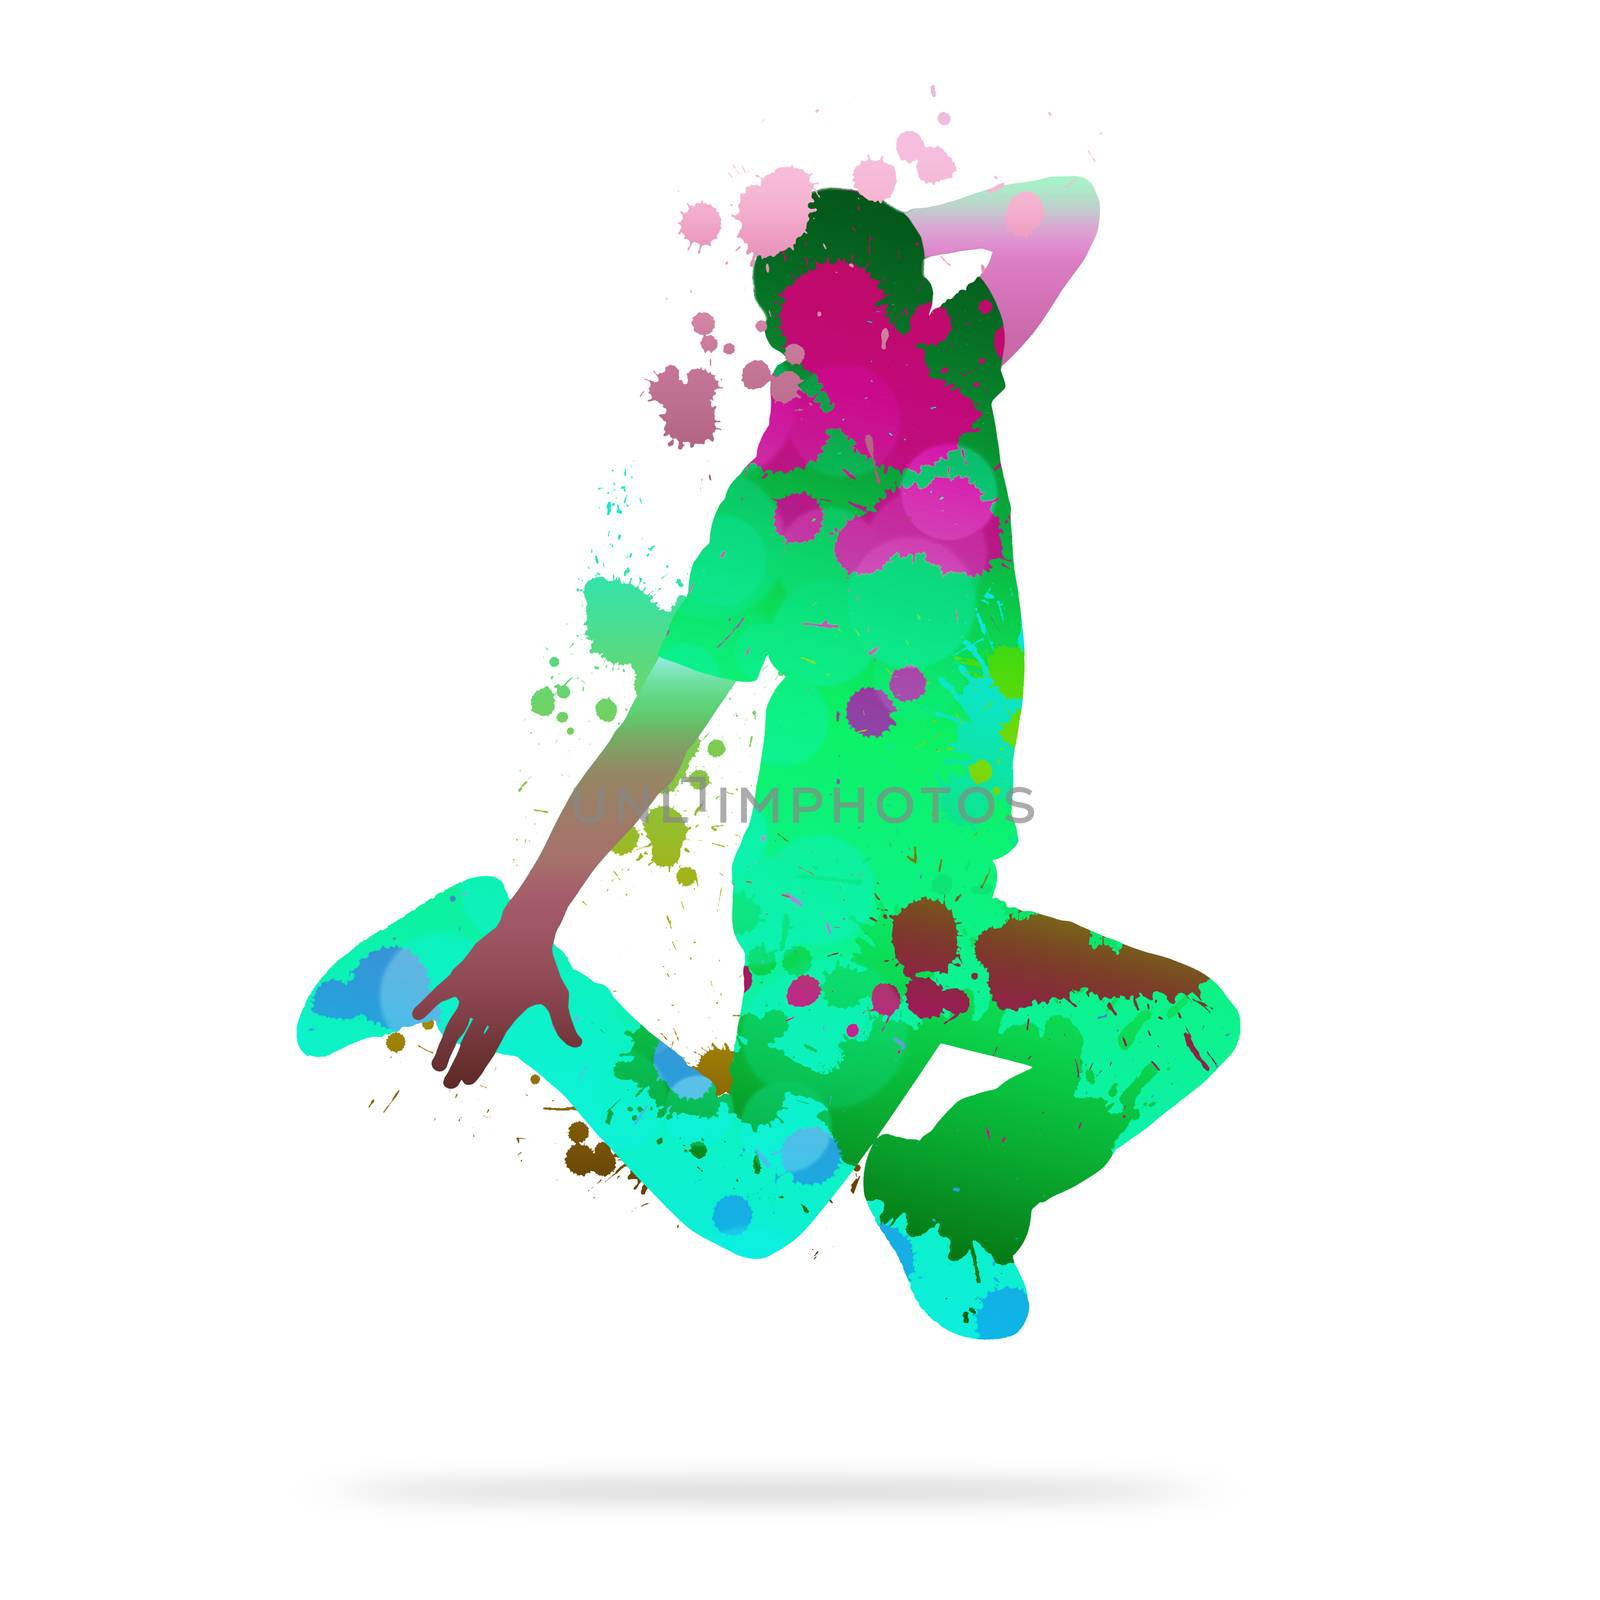 Image with color silhouette of dancer on white background